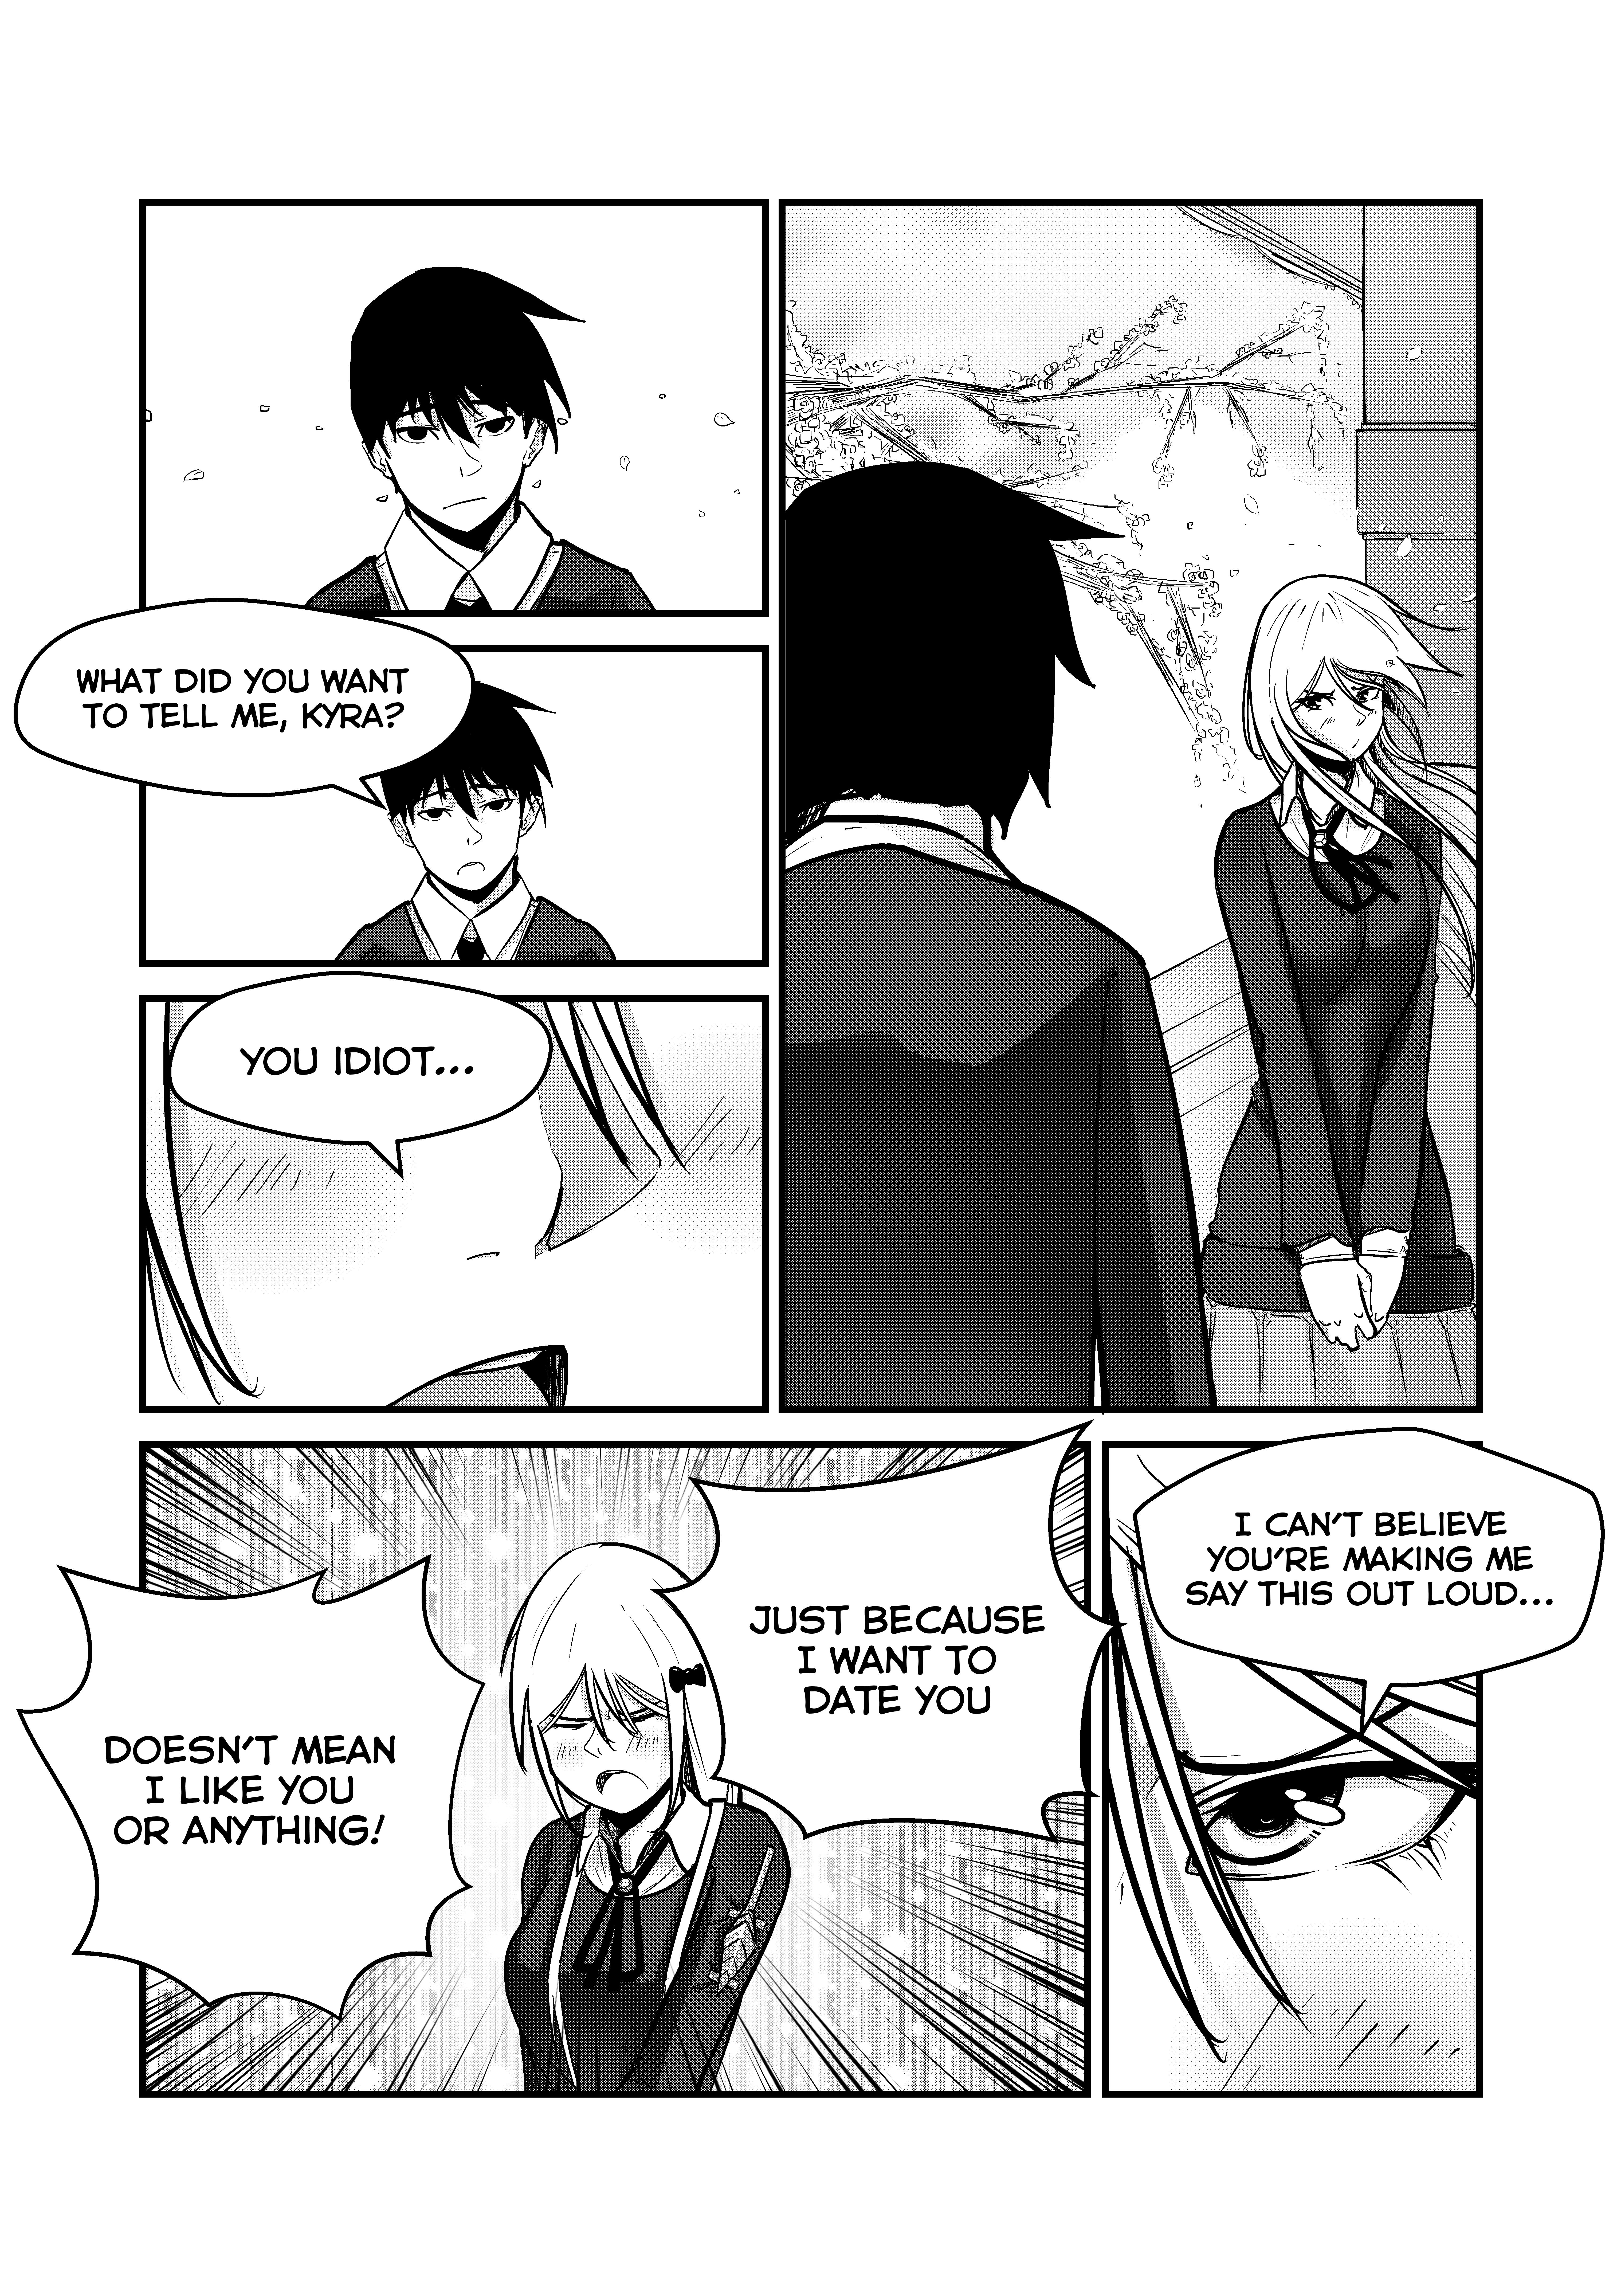 Opposites In Disguise - 5 page 7